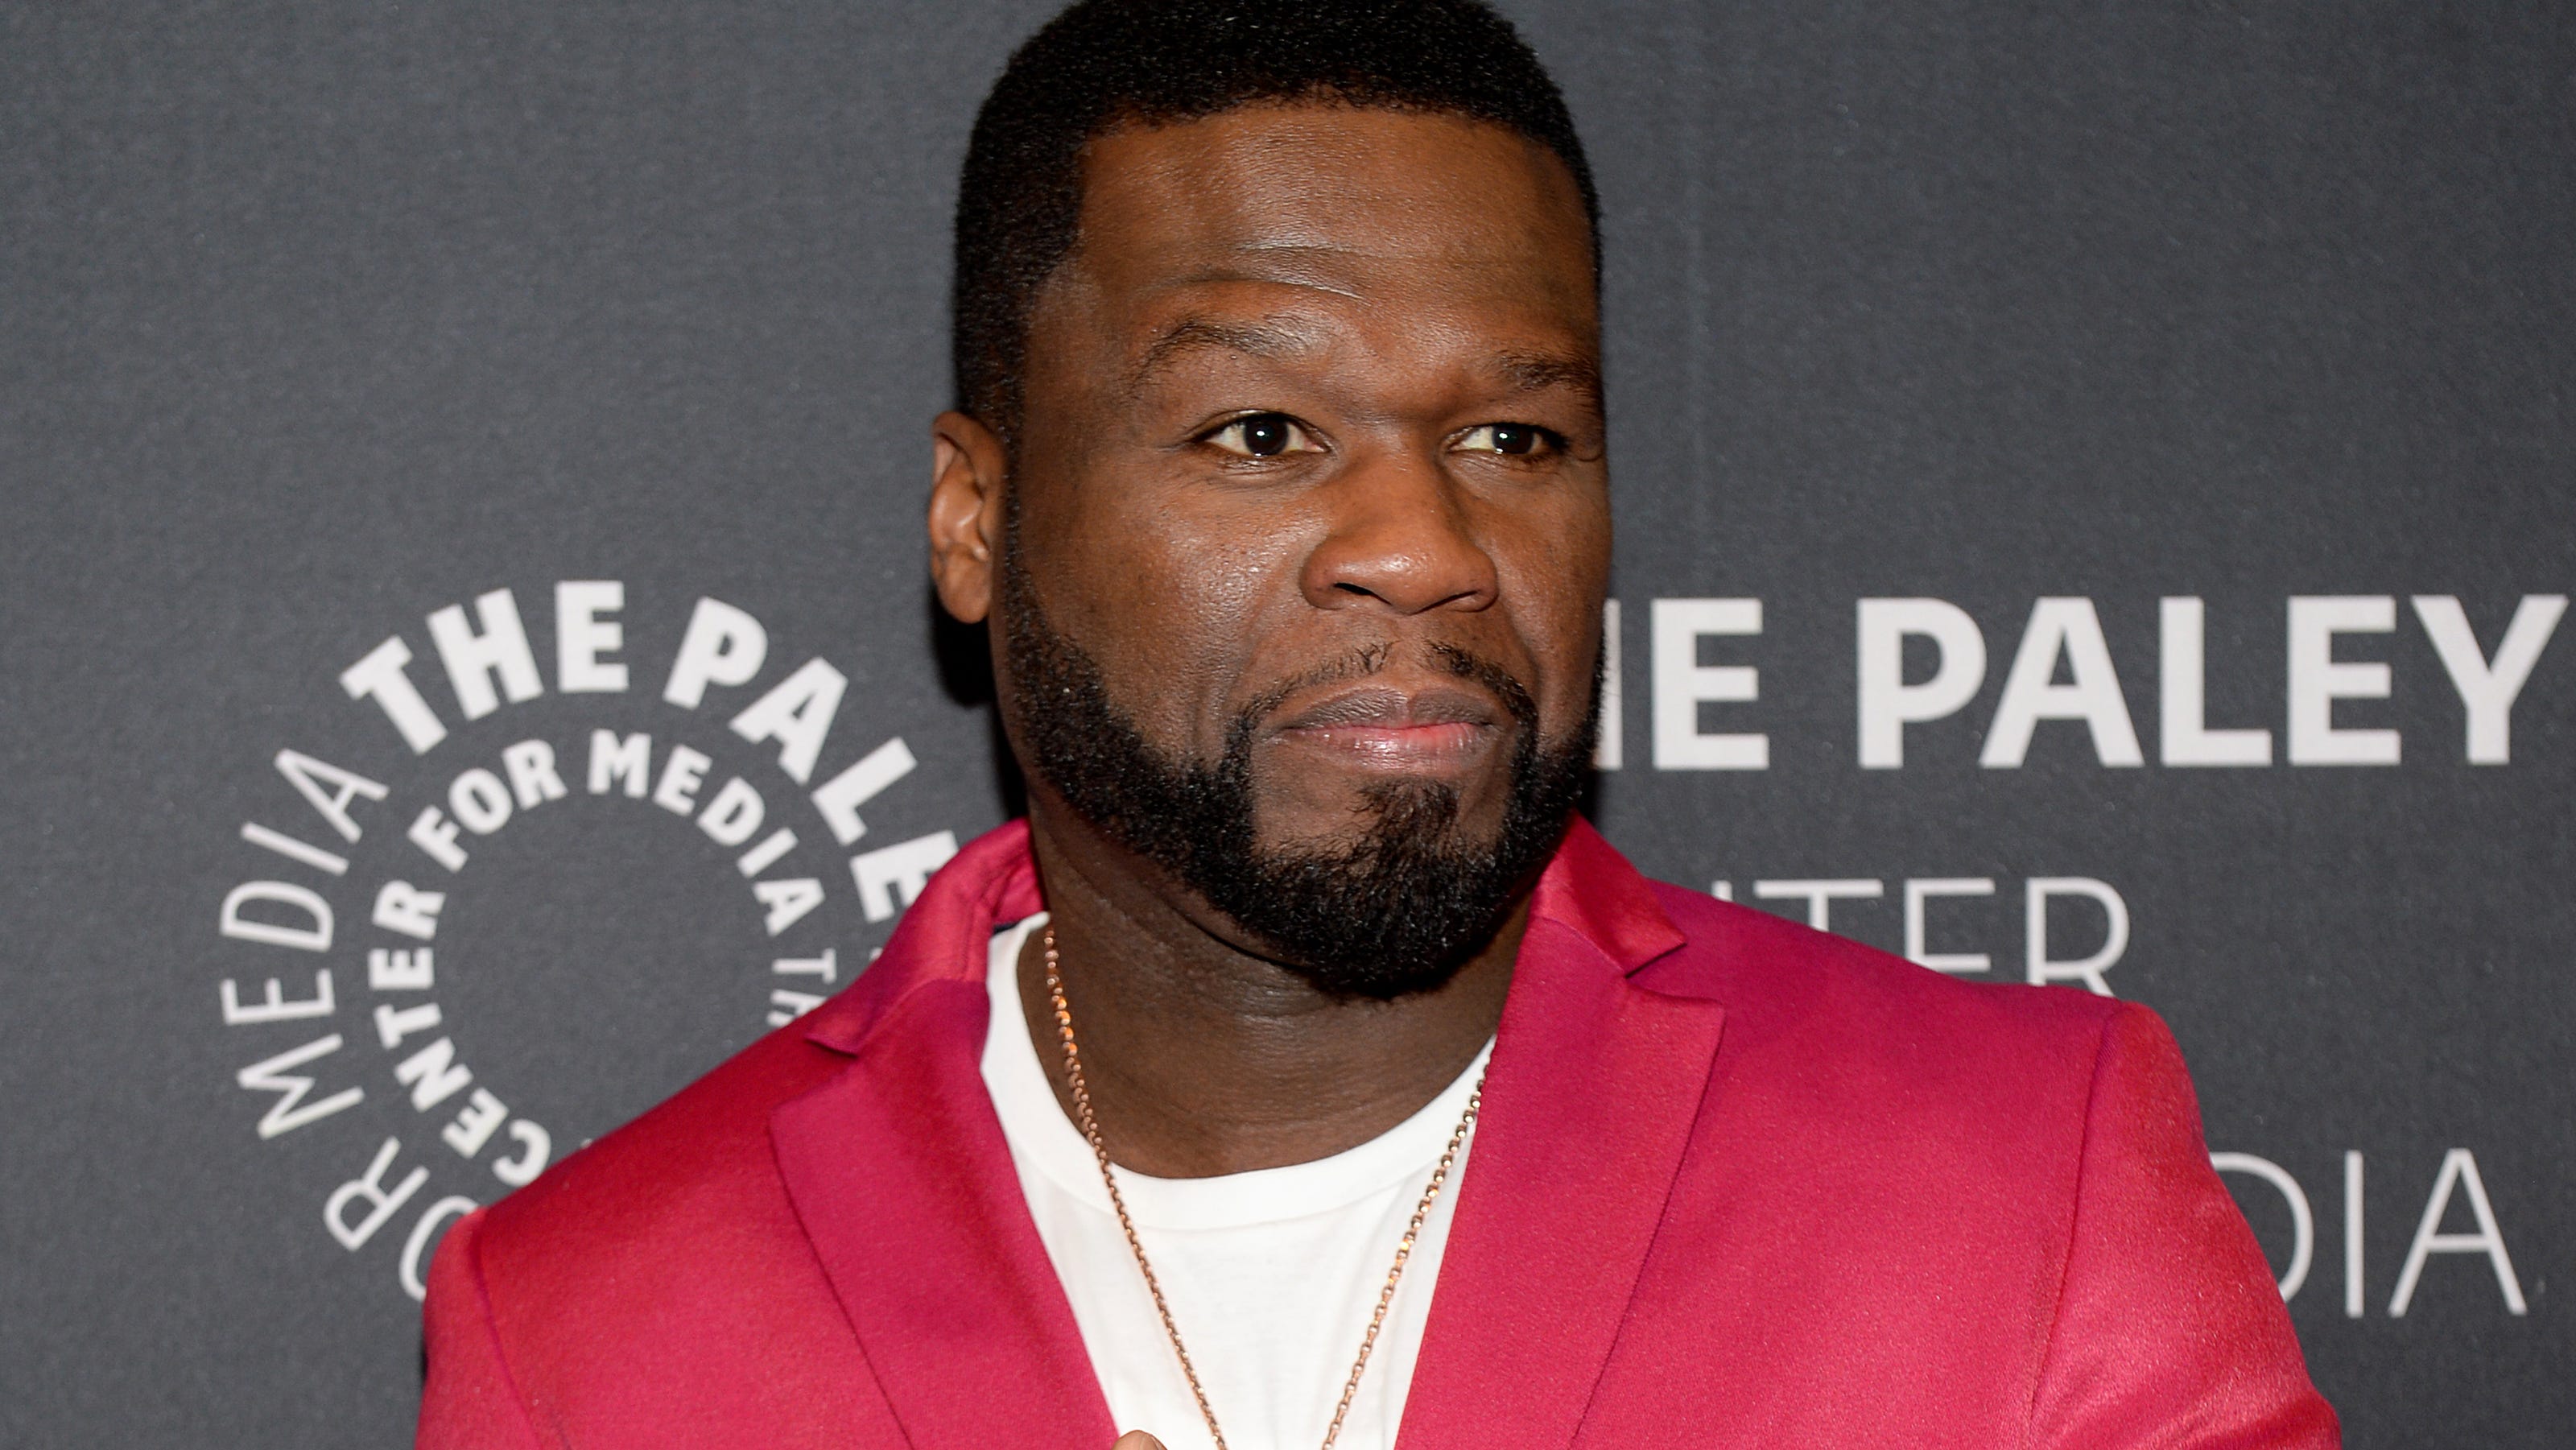 50 Cent shouts out Brian Robinson after Commanders play 'Many Men'